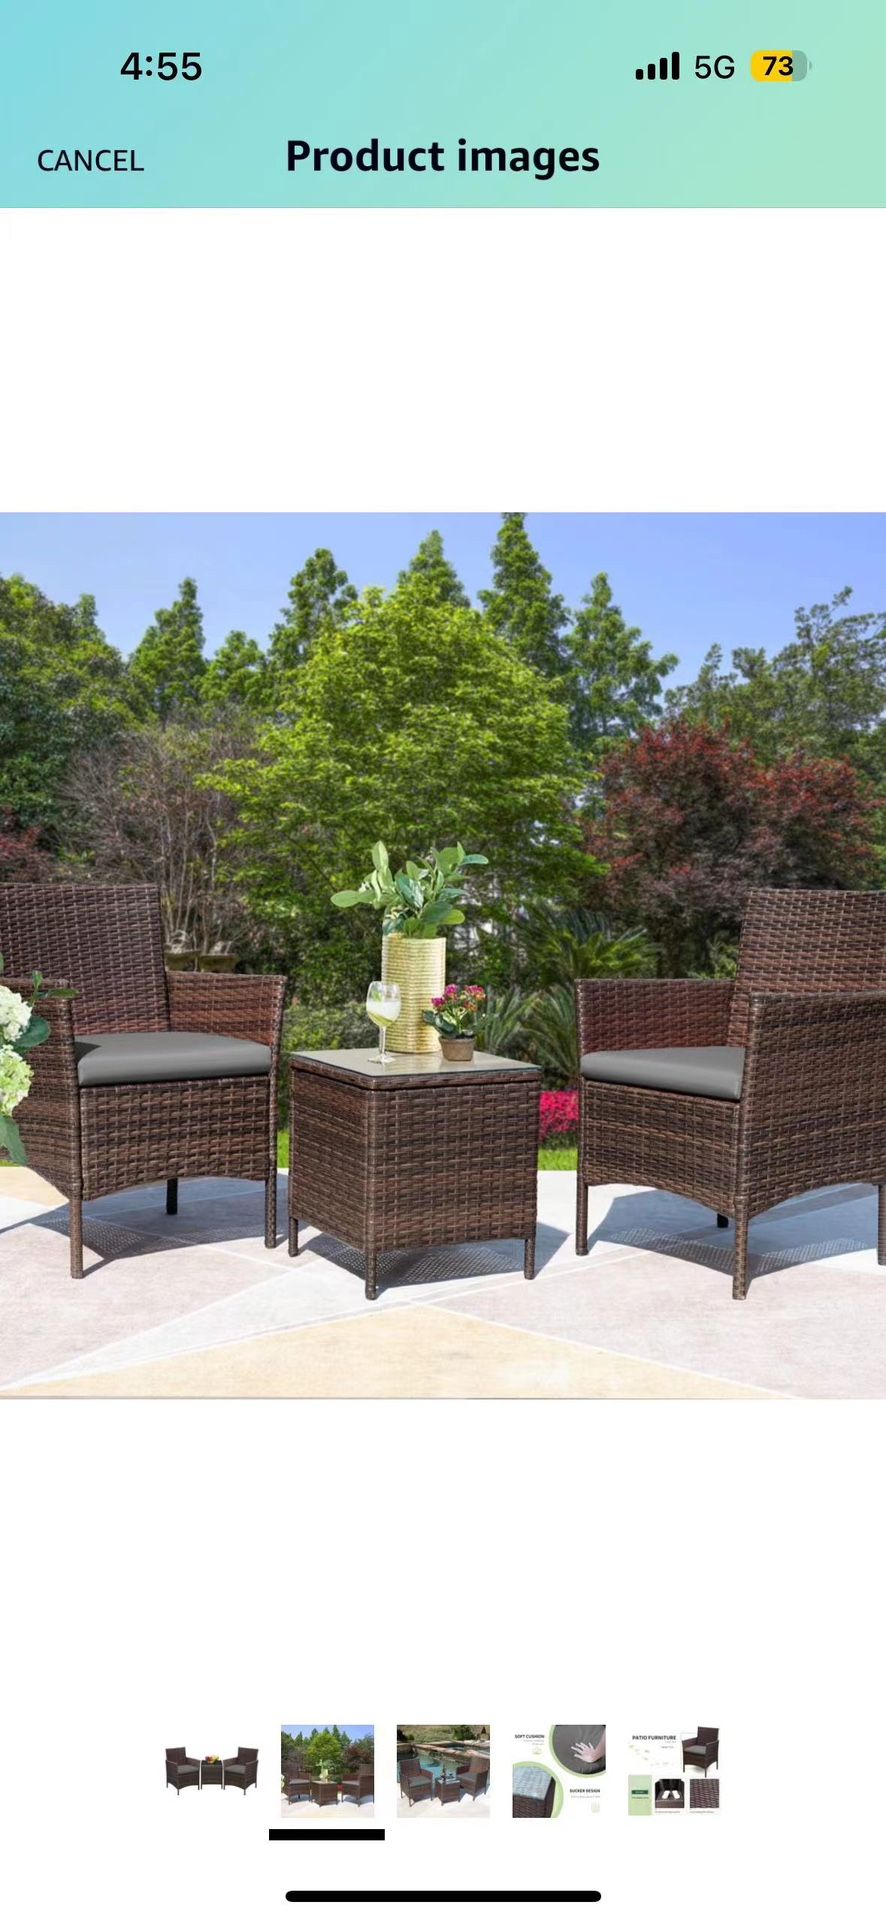 3 Pieces Patio Furniture Sets Outdoor PE Rattan Wicker Chairs with Soft Cushion and Glass Coffee Table for Garden Backyard Porch Poolside, Brown and G